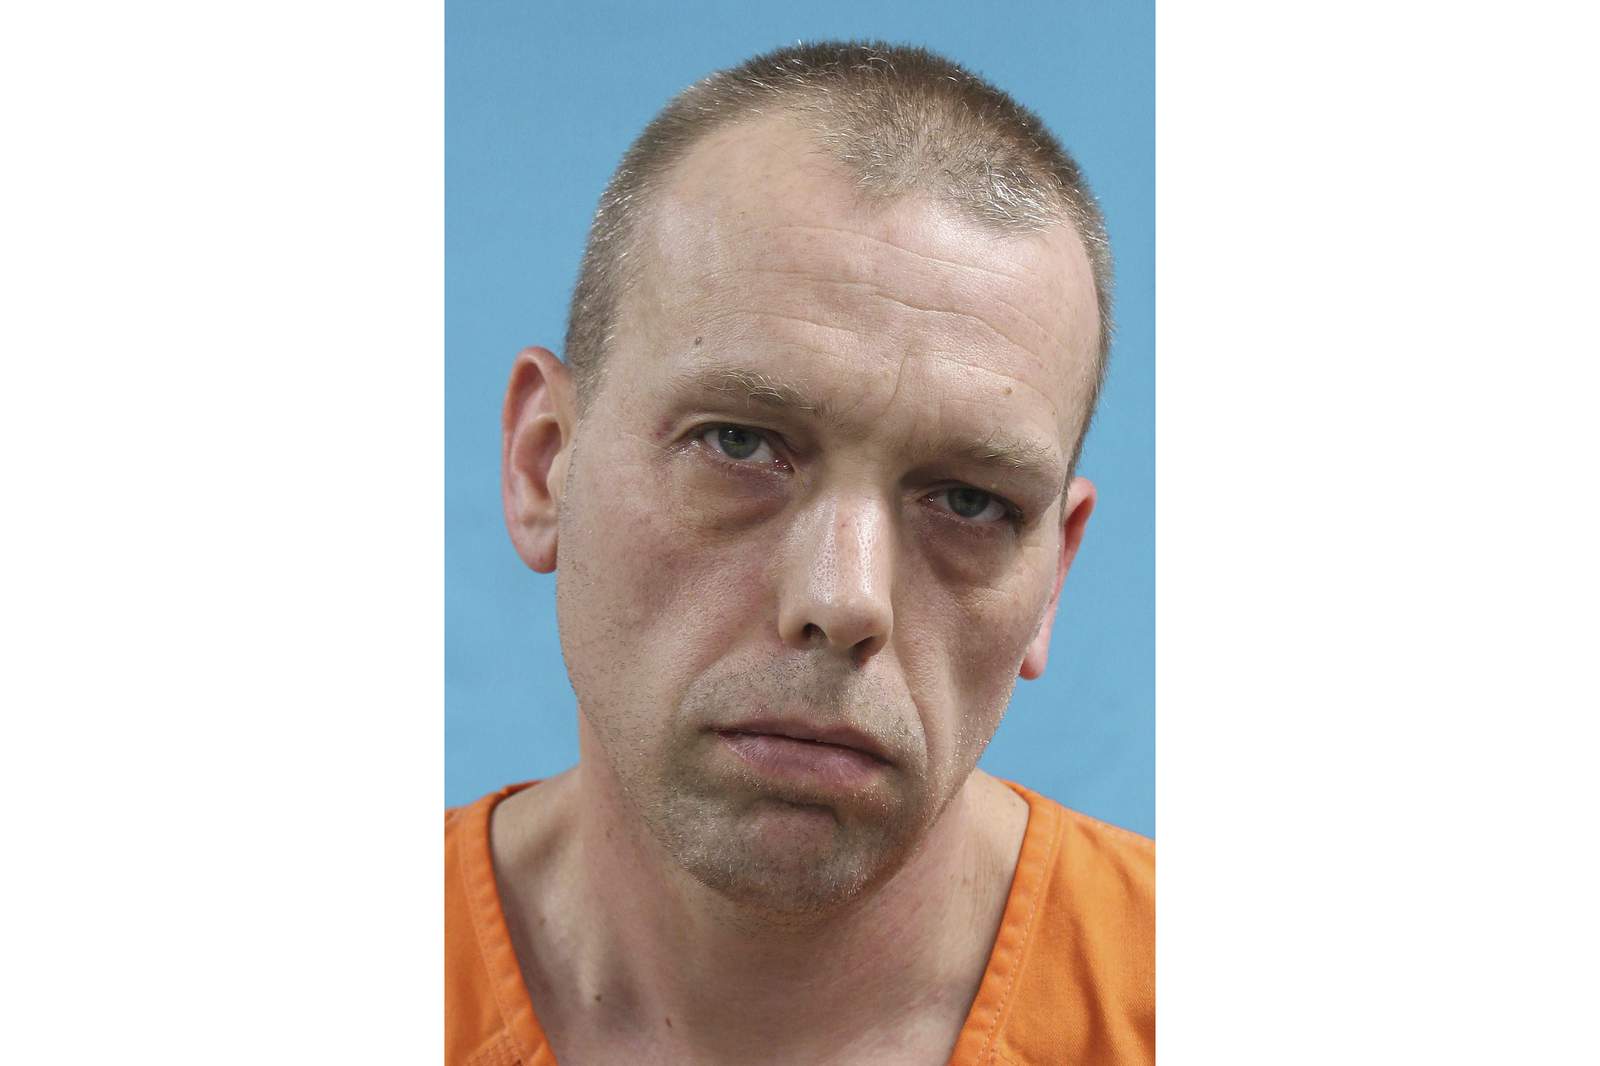 Man charged with hate crime over fire set at Missouri mosque